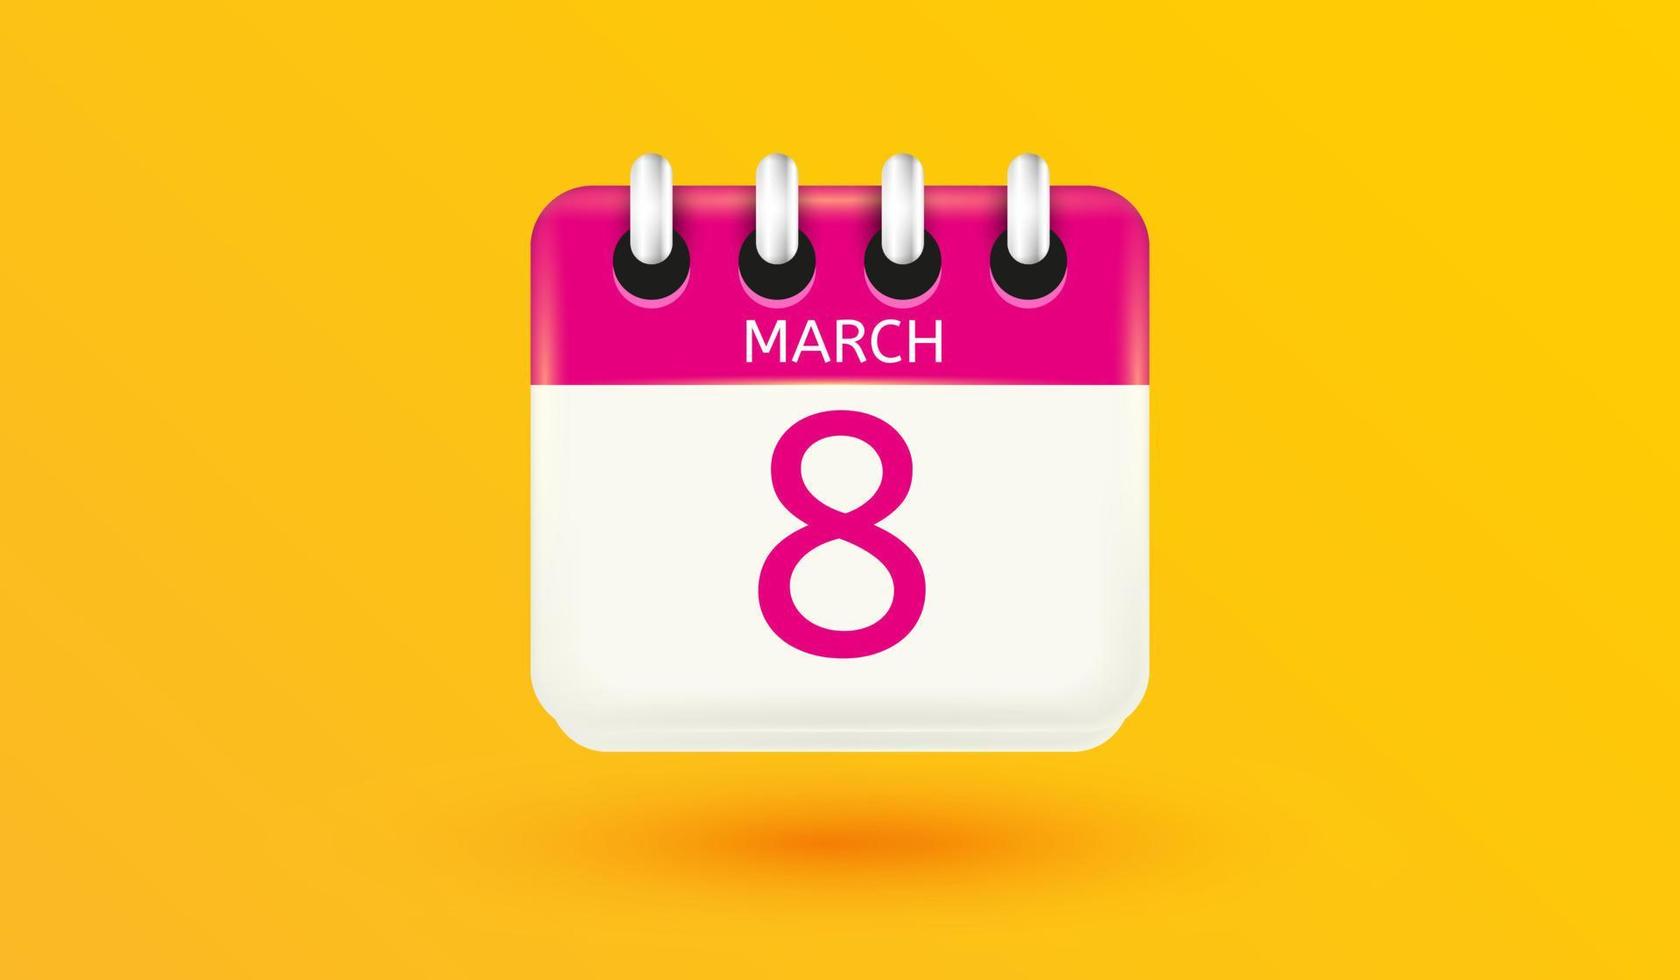 March 8, Calendar icon international women's day card. number shaped as big eight with shadow background 3d vector illustration style